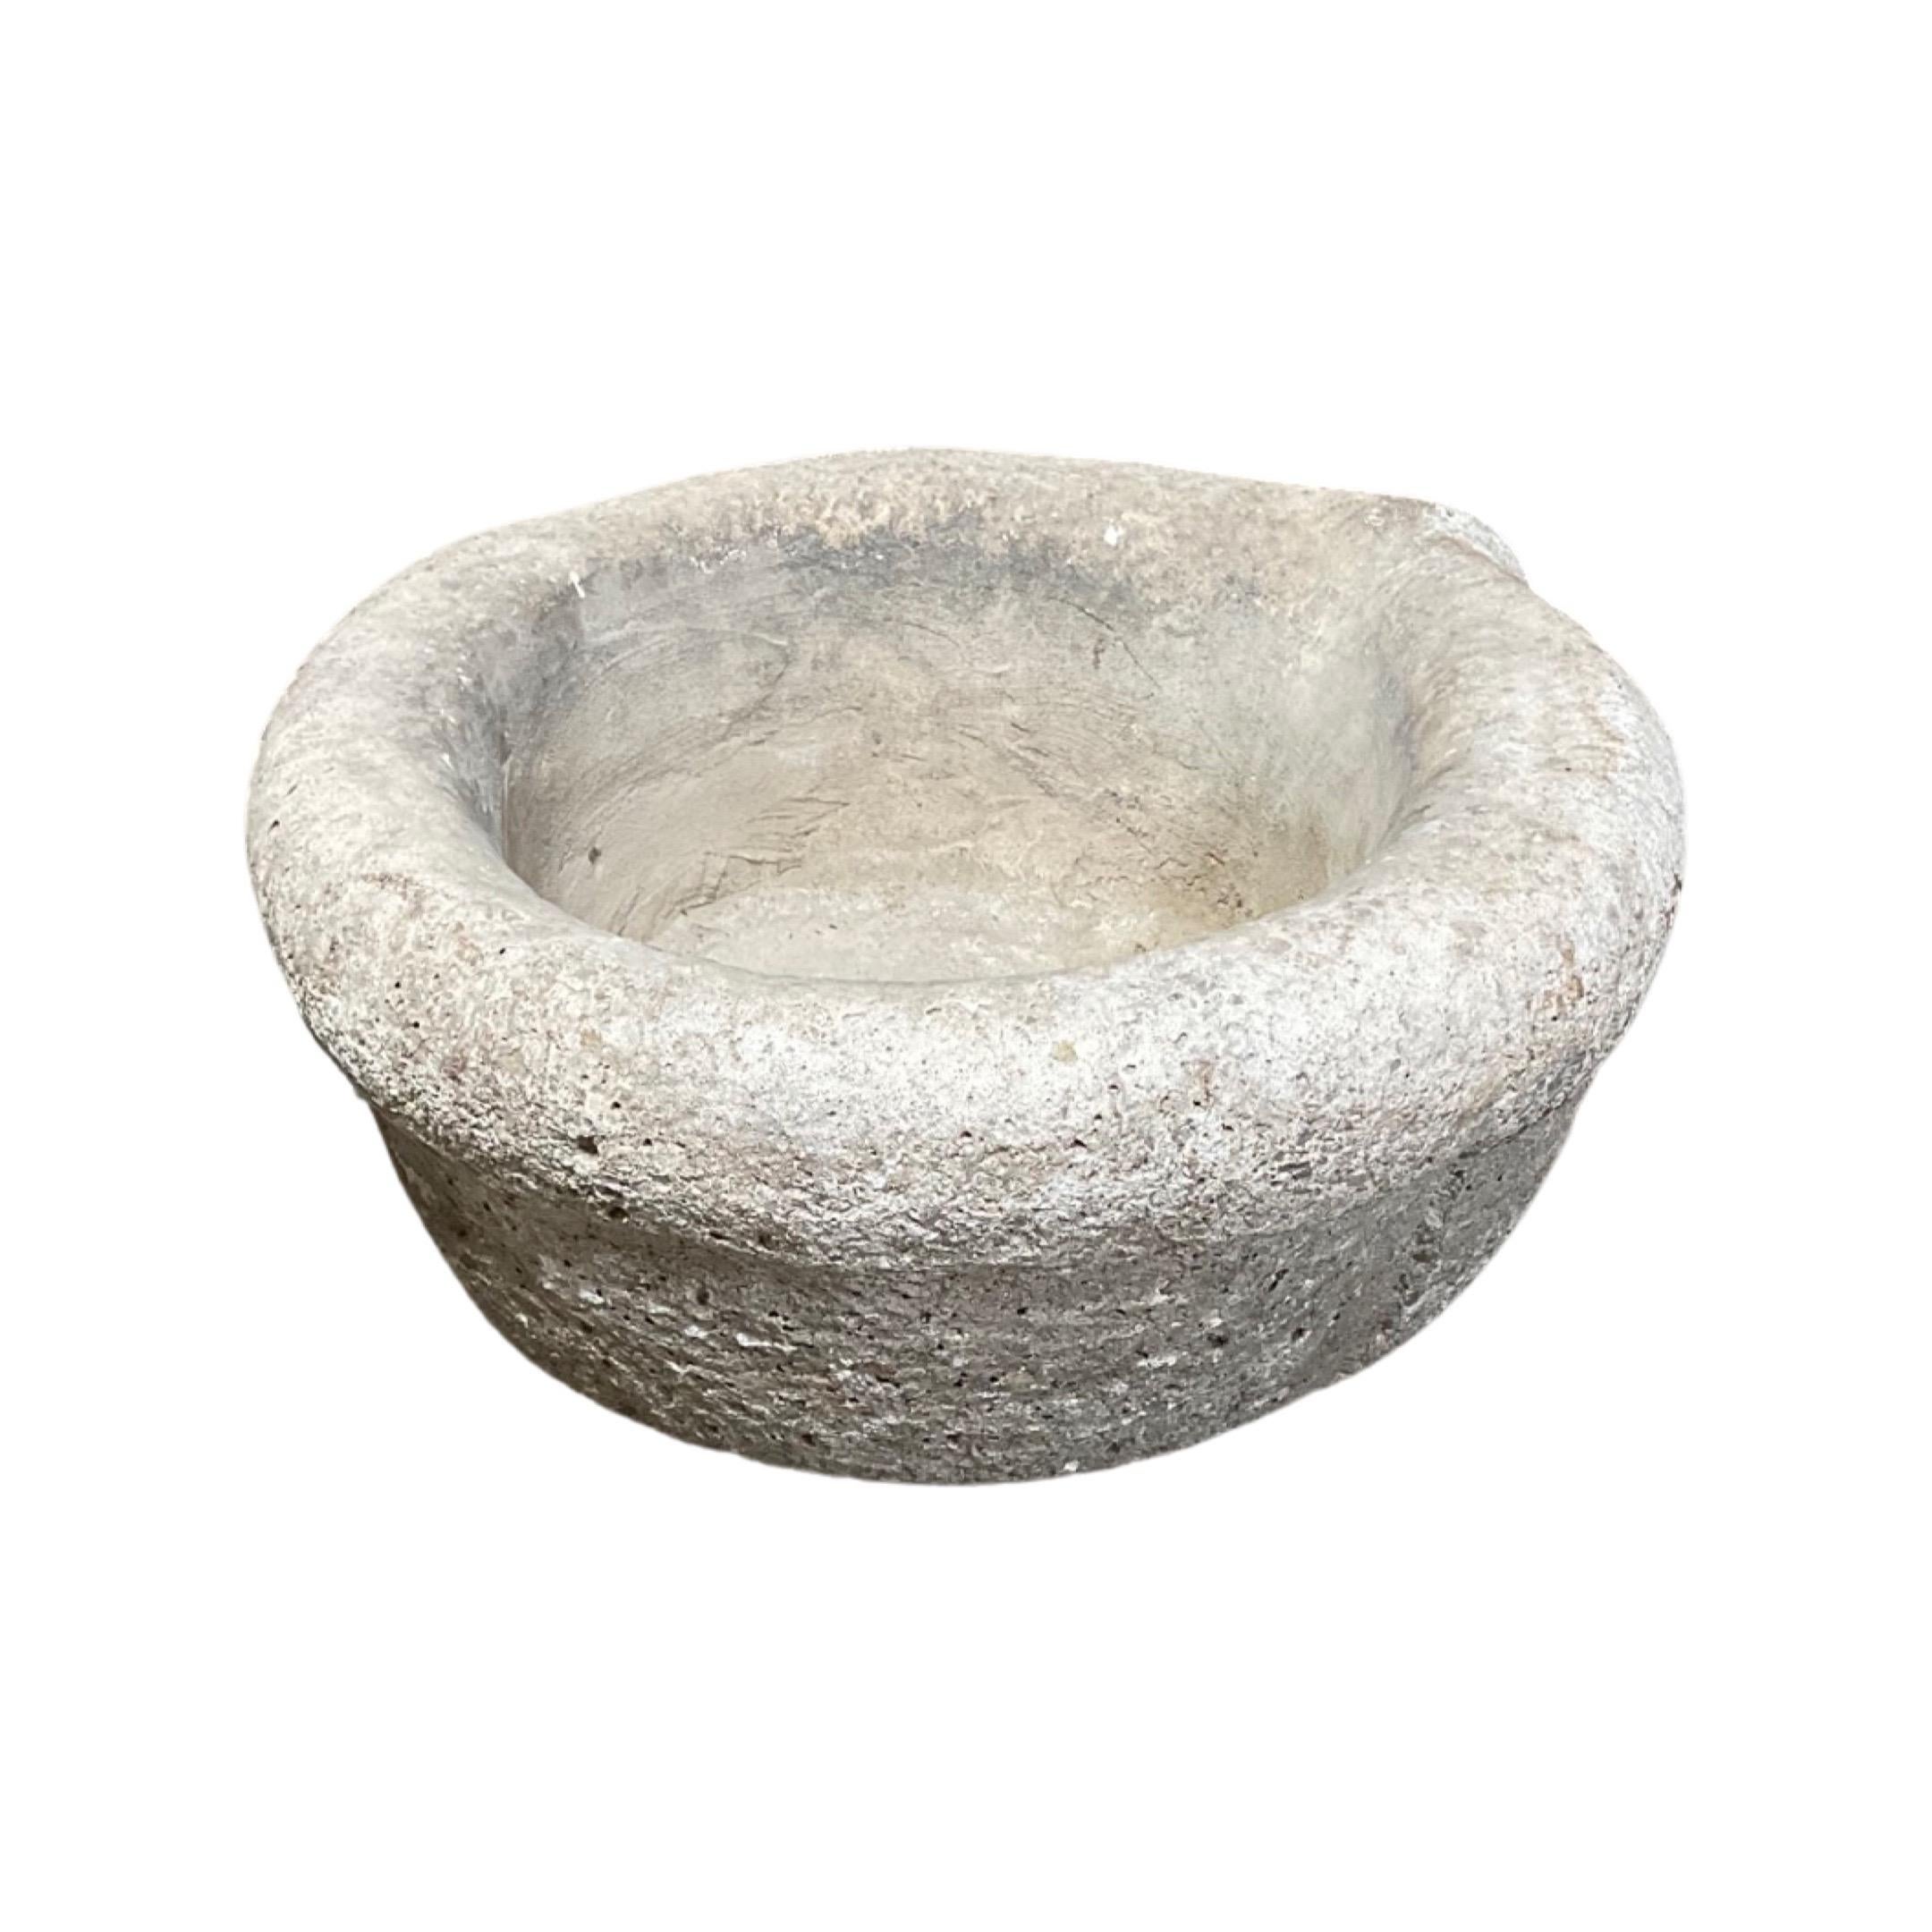 This French Limestone Mortar Bowl was crafted in 1850 and is a perfect addition to any kitchen for anyone looking for a stylish way to grind herbs and spices. The fine-progress limestone material helps create a smooth and fine blend. Enjoy the